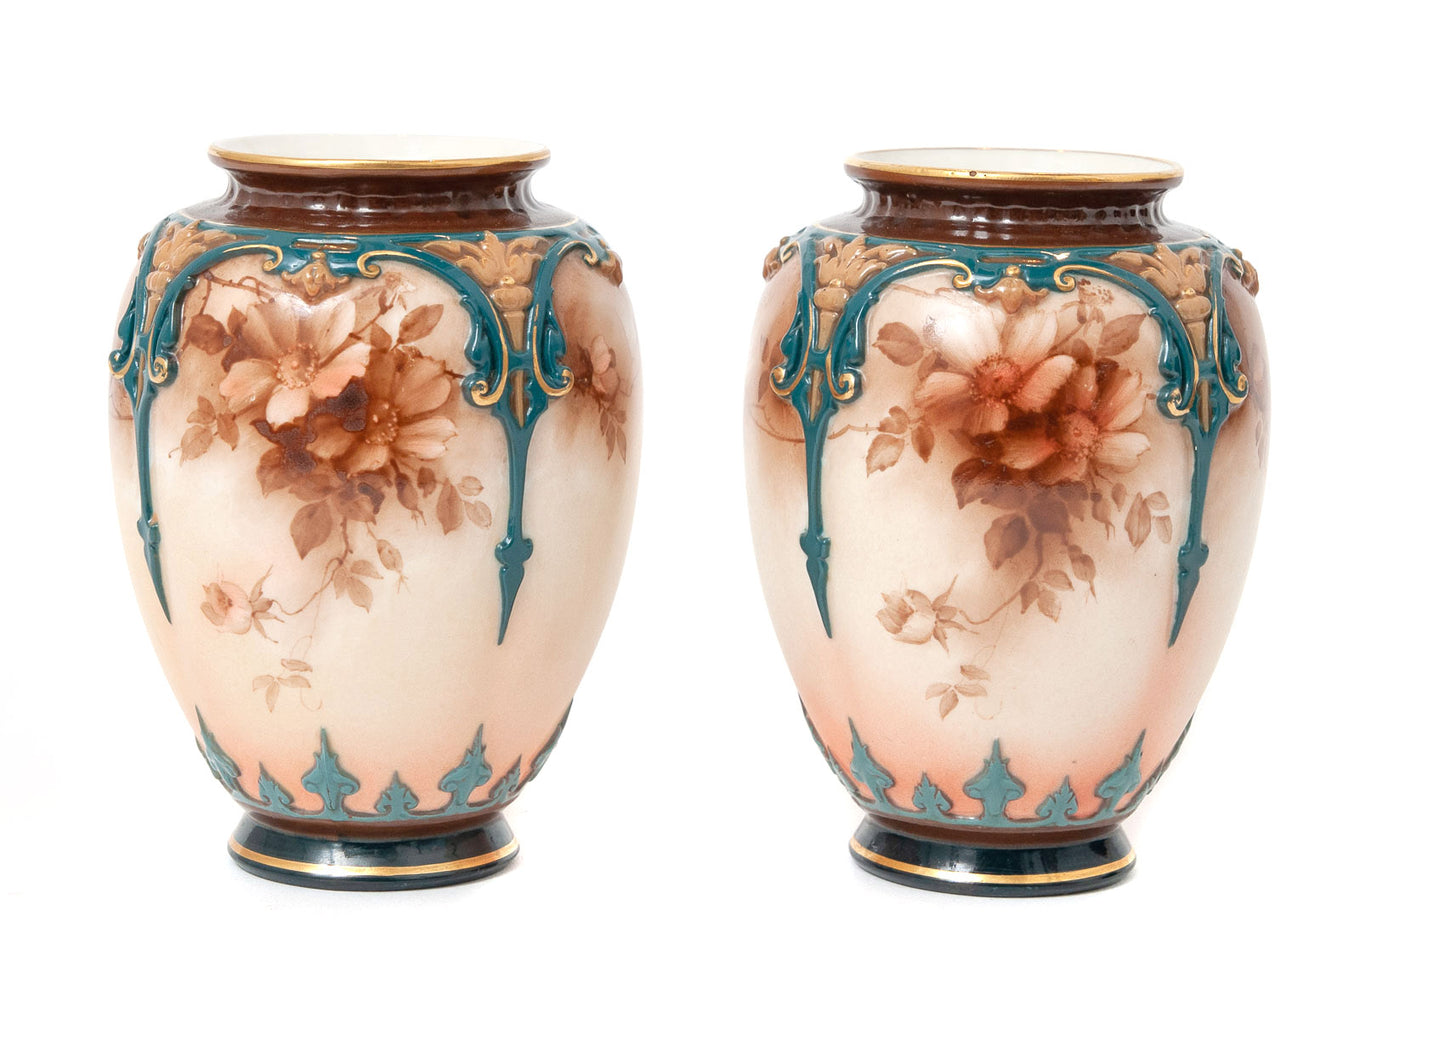 Pair of Antique Hadley Worcester China Hand Painted Monochrome Vases c1900 (Code 1530)